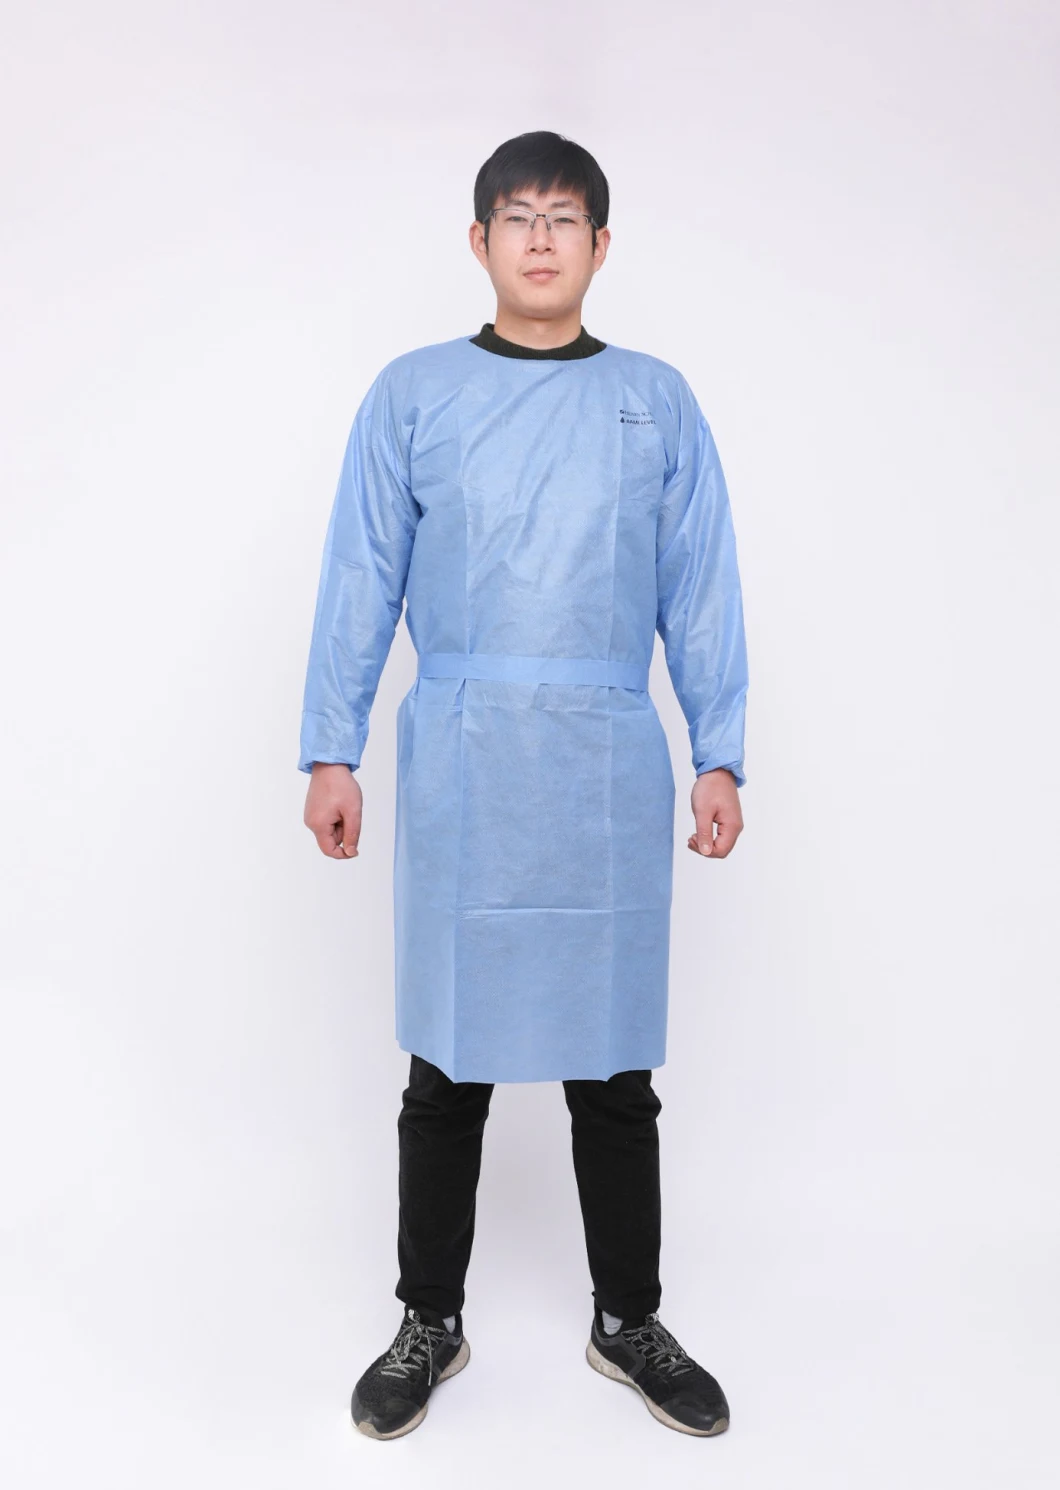 Disposable Non Woven Patient Gown Non-Woven Cover Blue Waterproof Plastic Isolation Gown with Long Sleeves